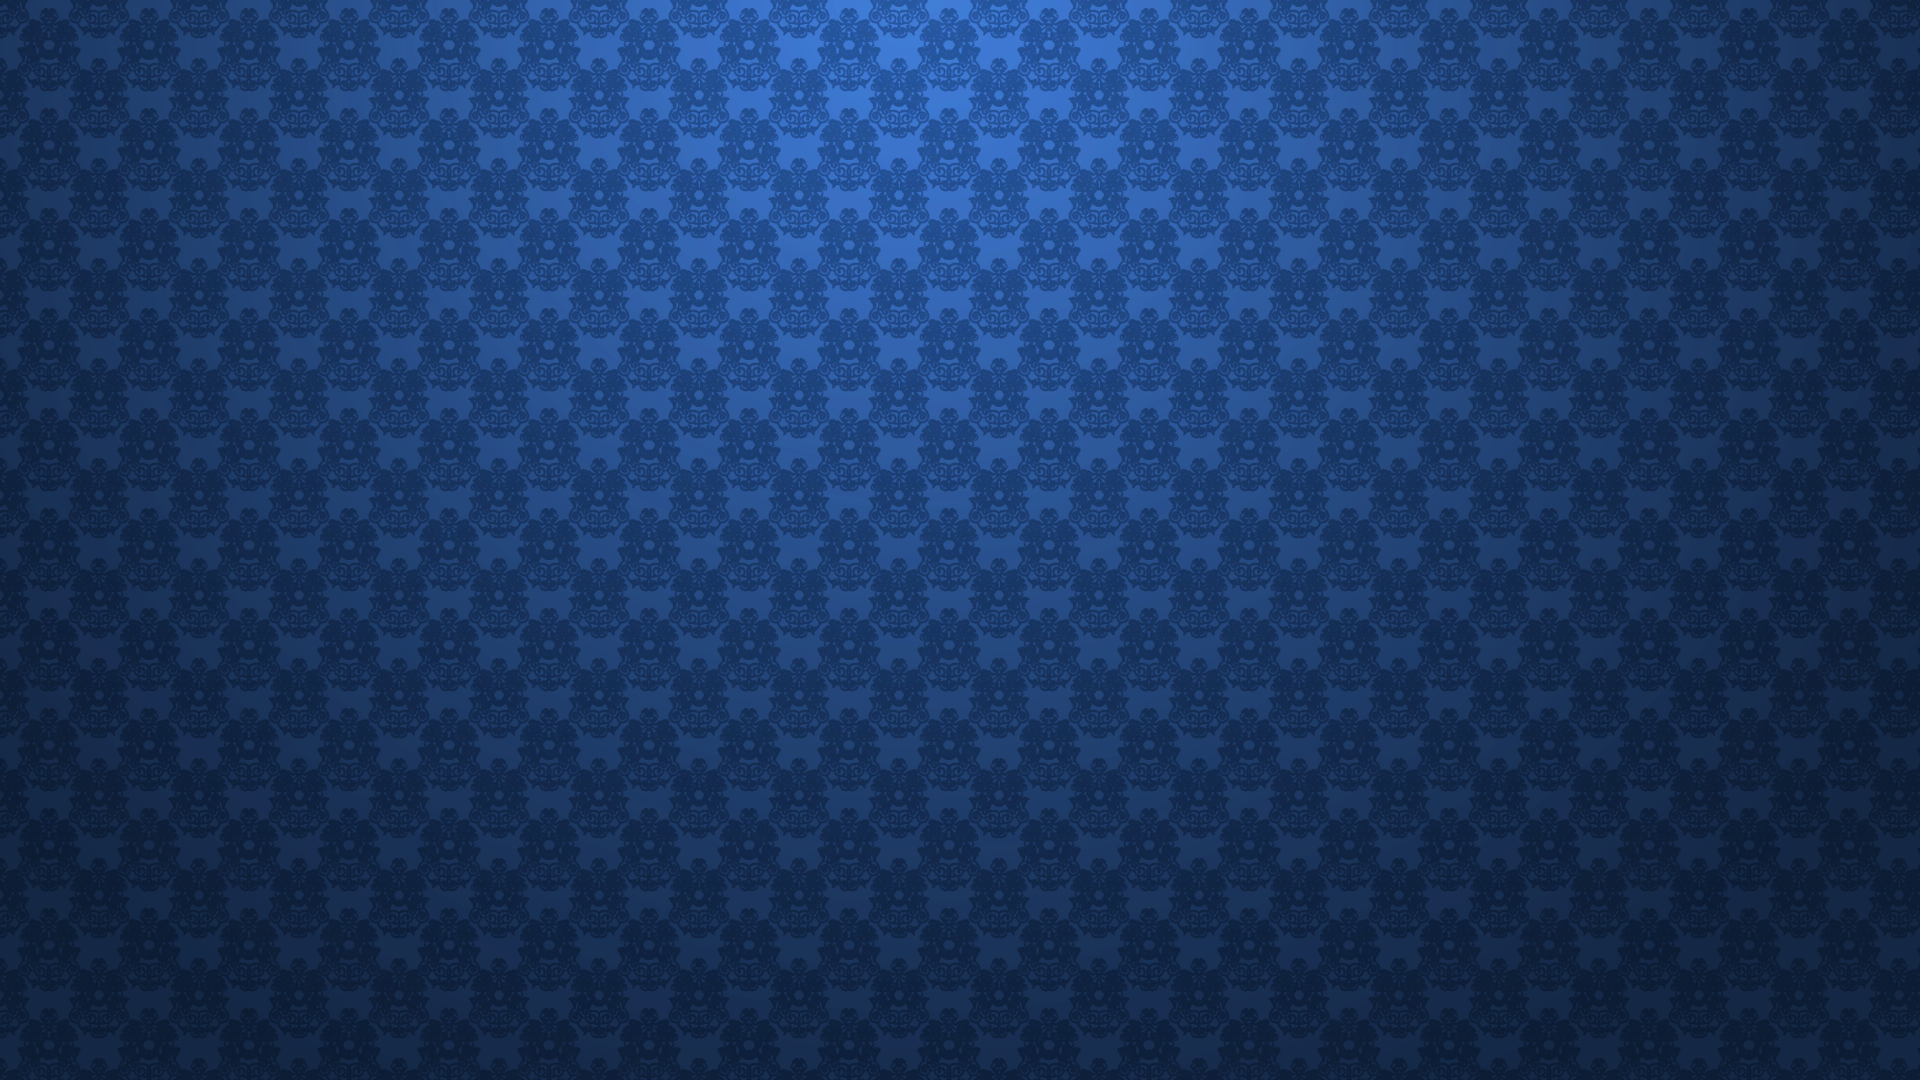 Royal monogram, blue background wallpapers and images - wallpapers ...